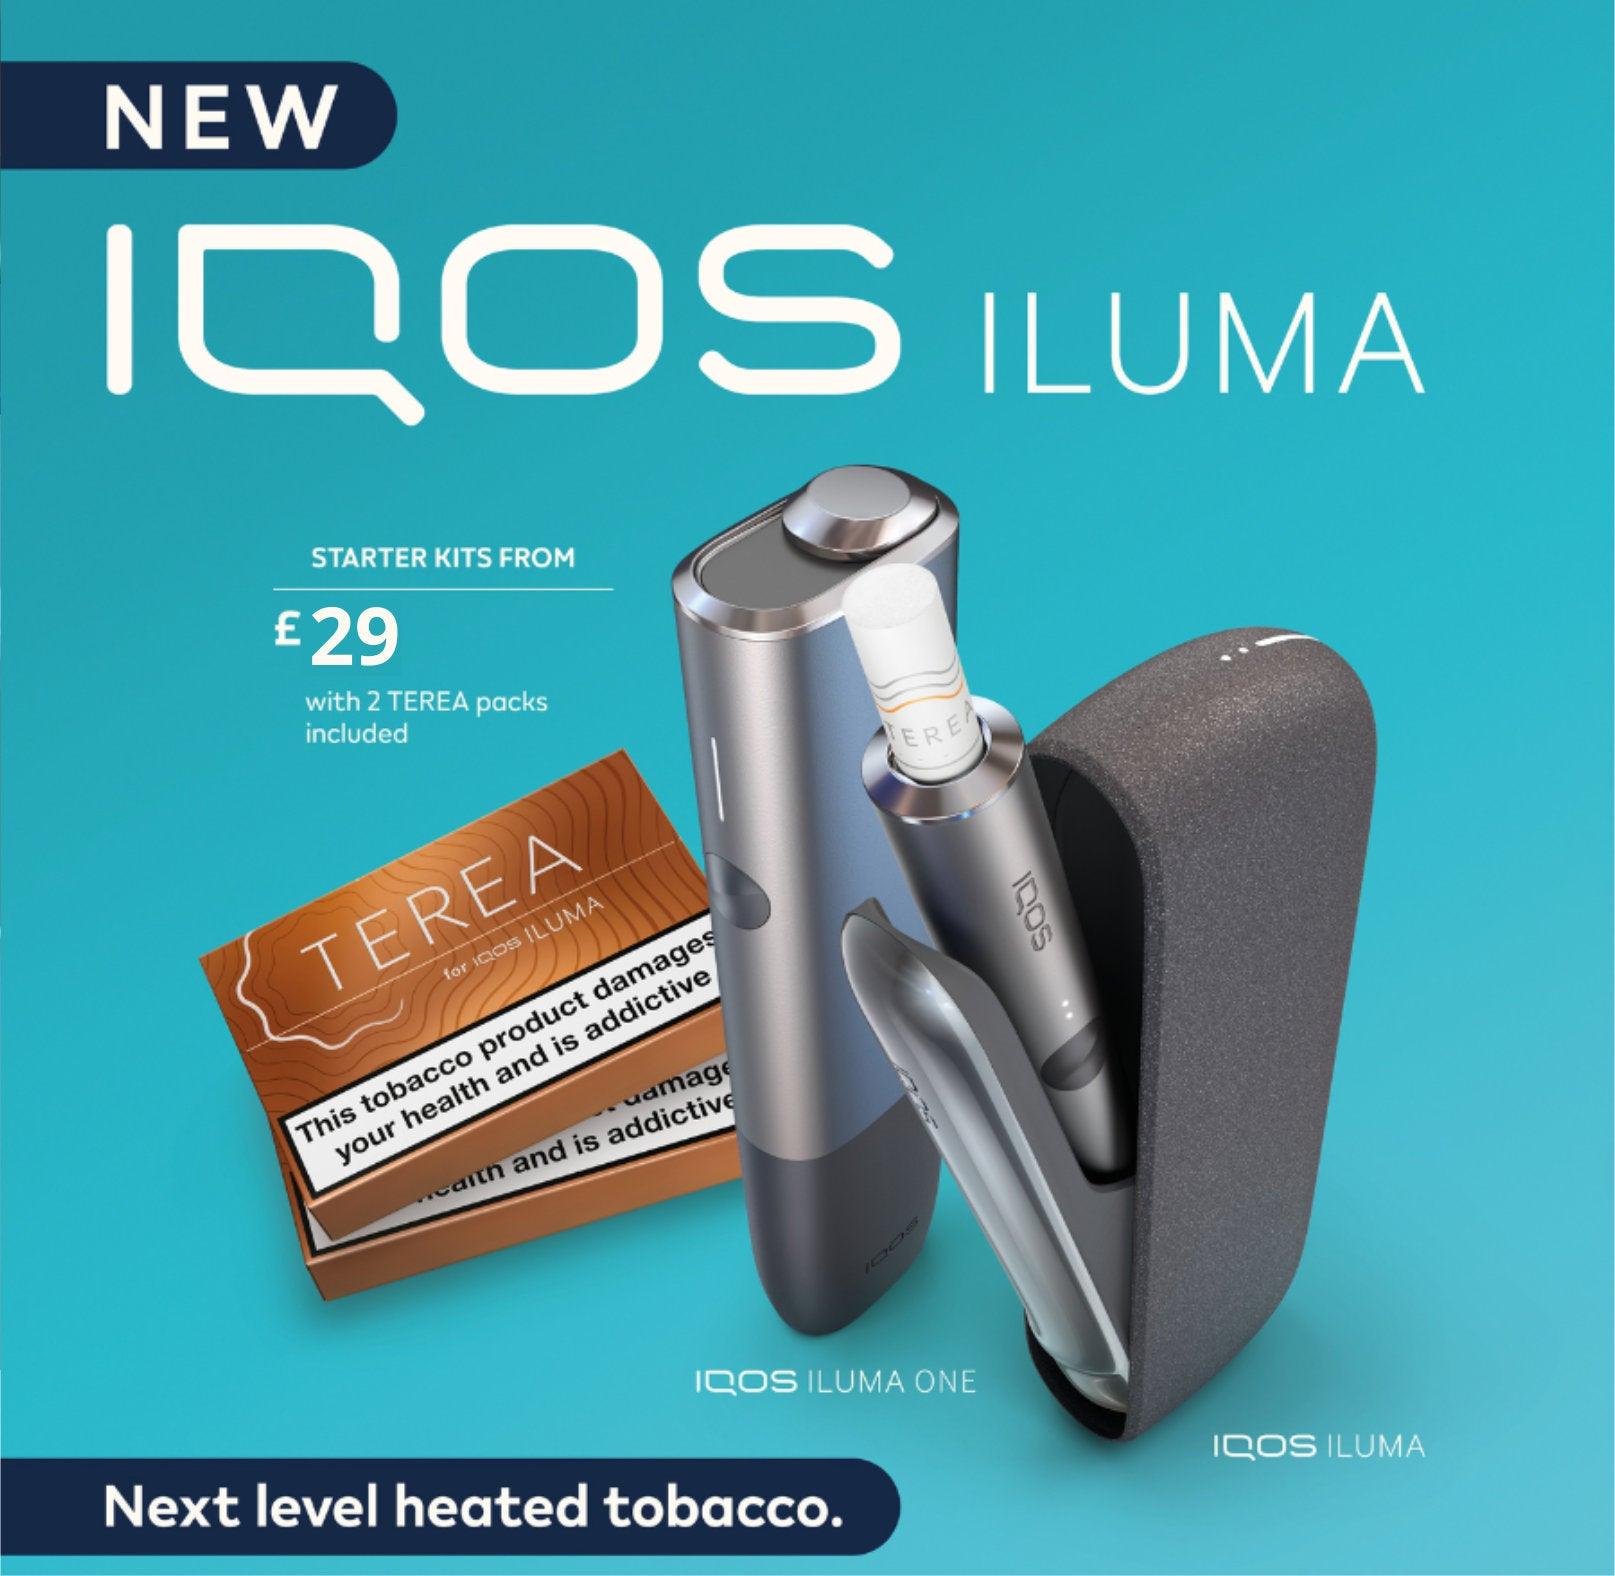 Where Can I Buy The Cheapest IQOS Iluma Device in the UK?